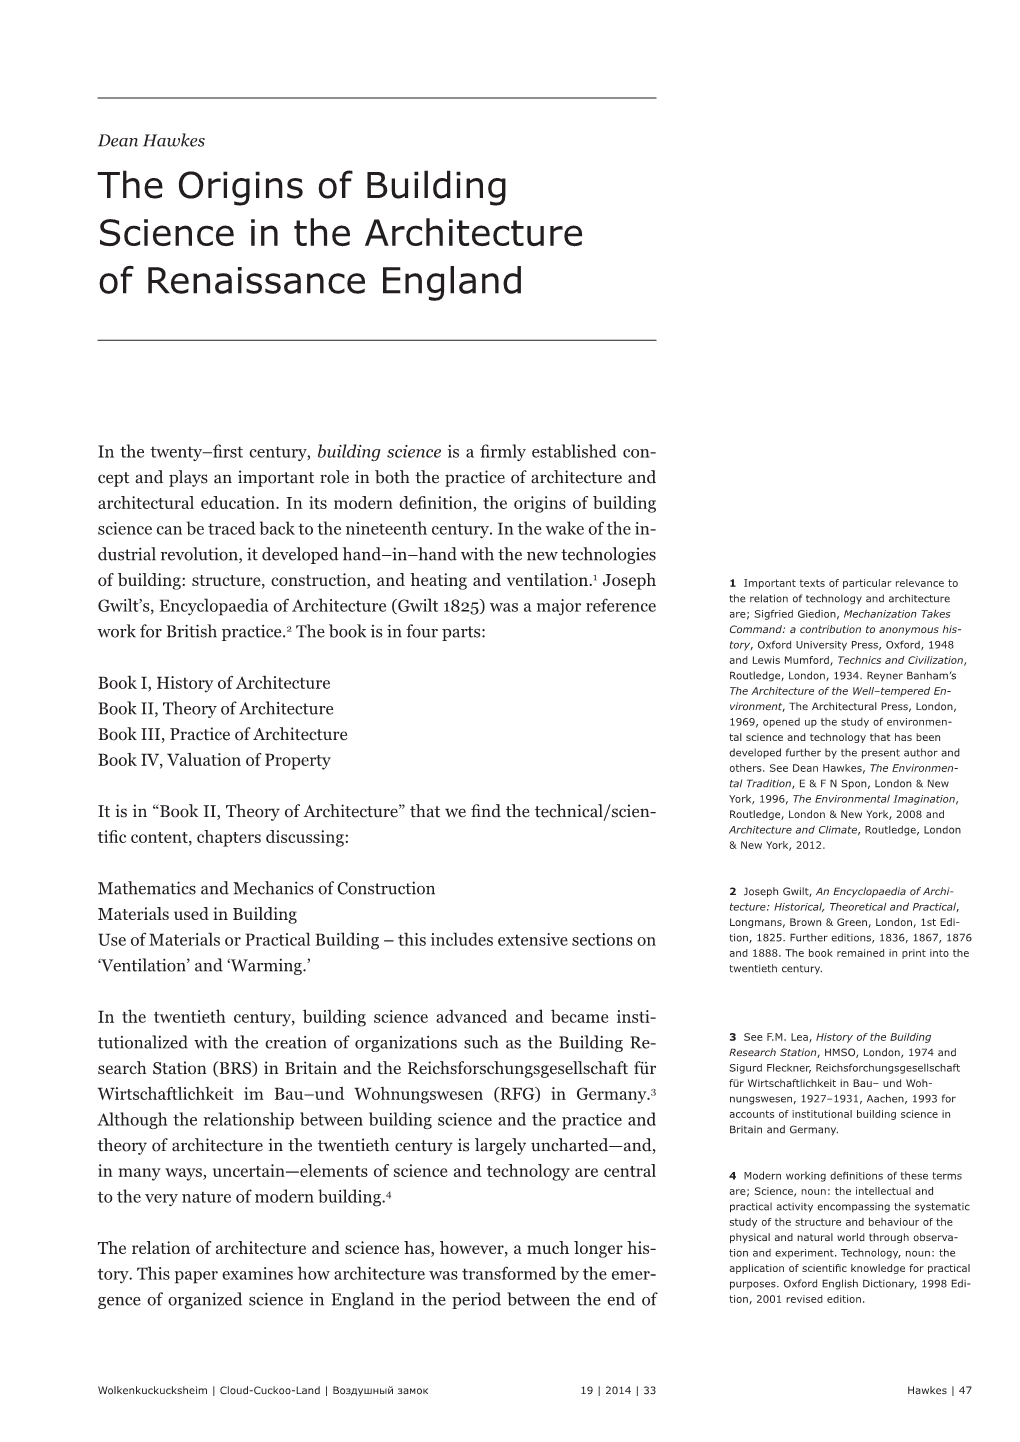 The Origins of Building Science in the Architecture of Renaissance England